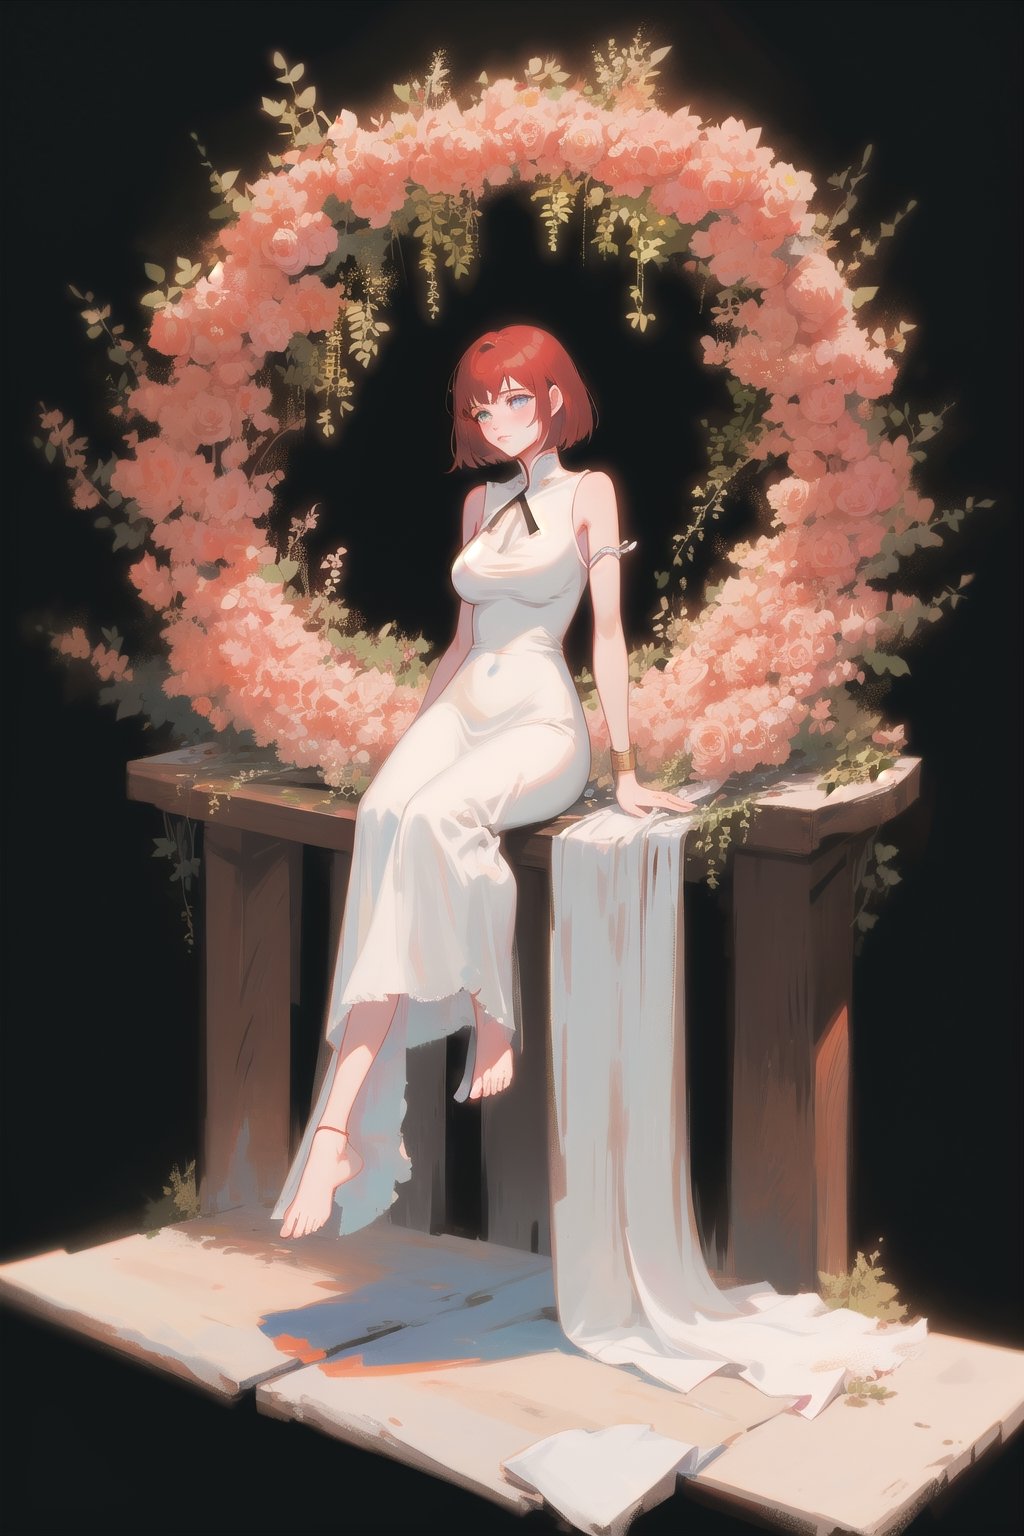 Goddess, red hair, white chinese dress, gradient background, large breasts, 1girl, solo, best quality, masterpiece, black background, full body, tarot_style, heavenly, aura, godess, detailed dress, motif, intricate dress design, chinese, simple white dress, sleeveless chinese dress, barefoot, black foot bracelet, simple background, sitting in heaven, vines, roses, leaves, tree, mature, calm, serenity, empress, goddess being worshipped, resting, extremely beautiful, beauty,